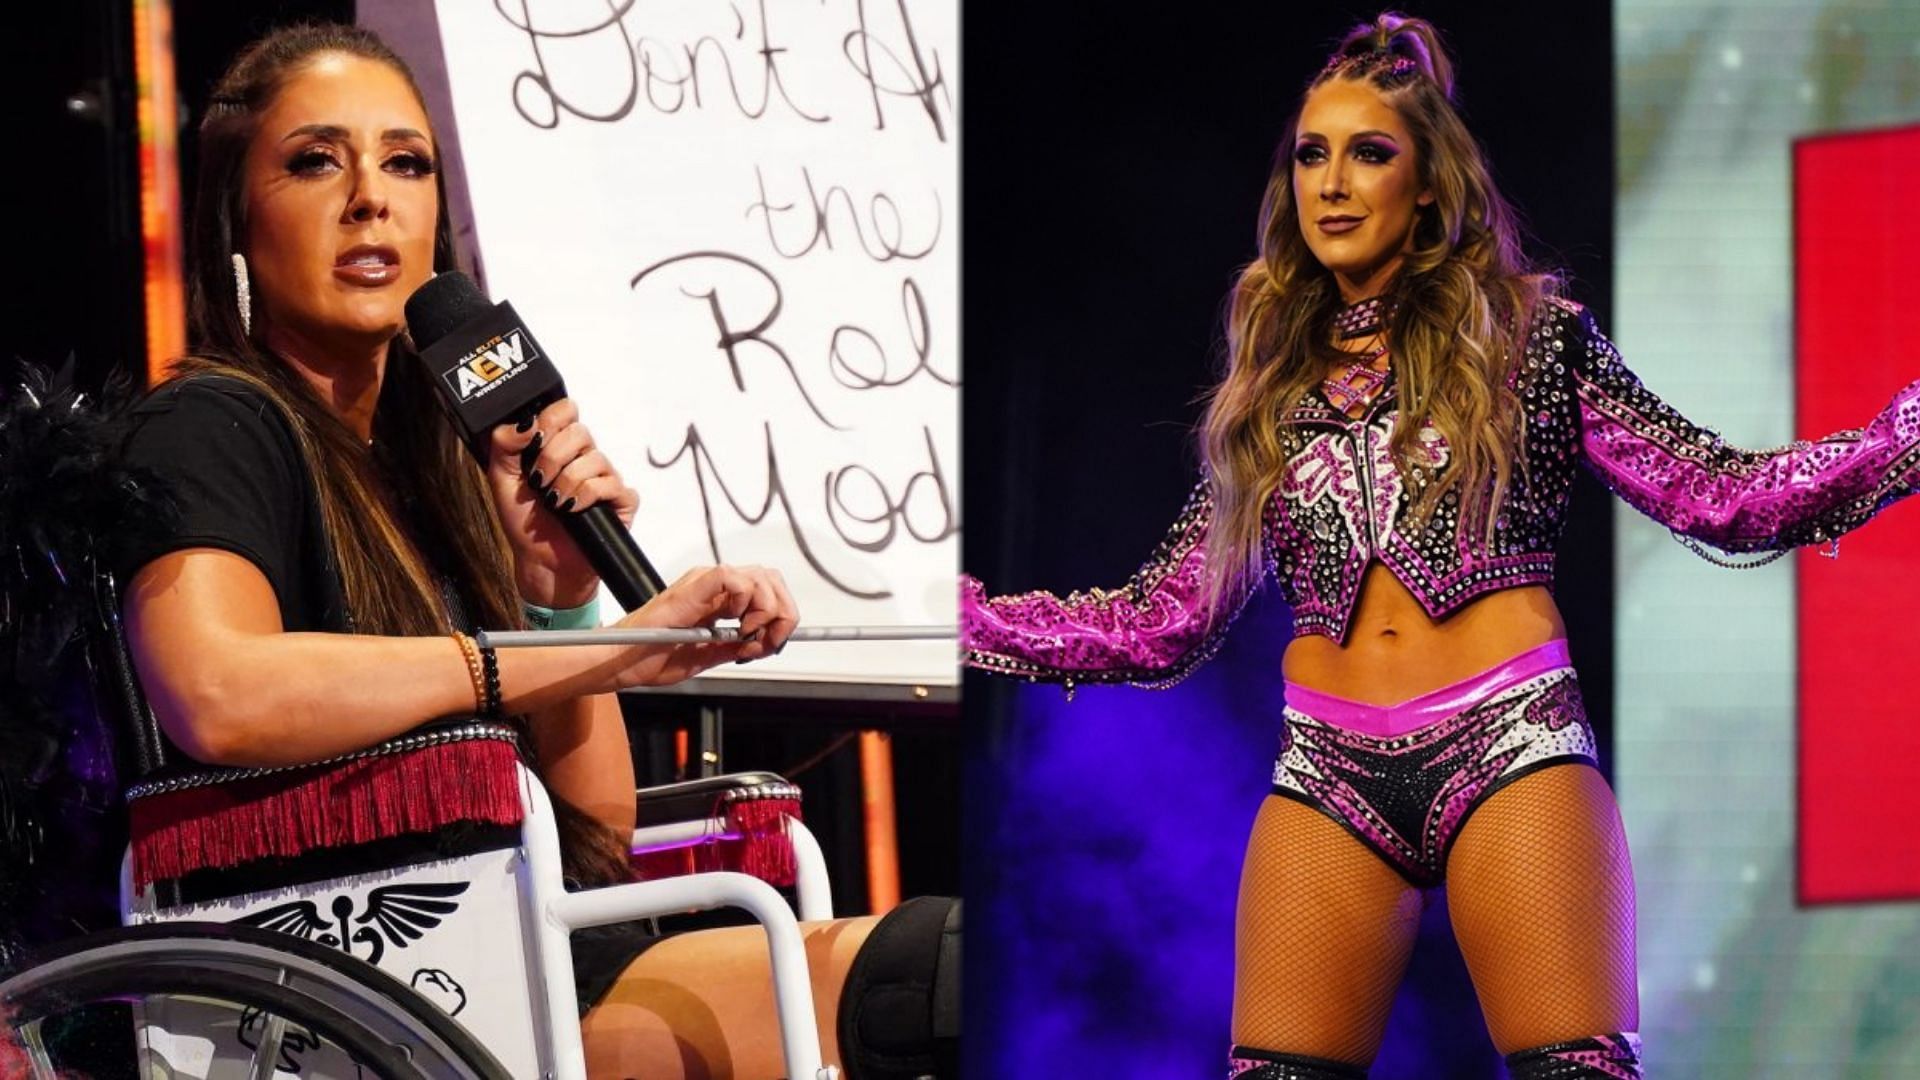 Britt Baker has been on the forefront of the AEW Women